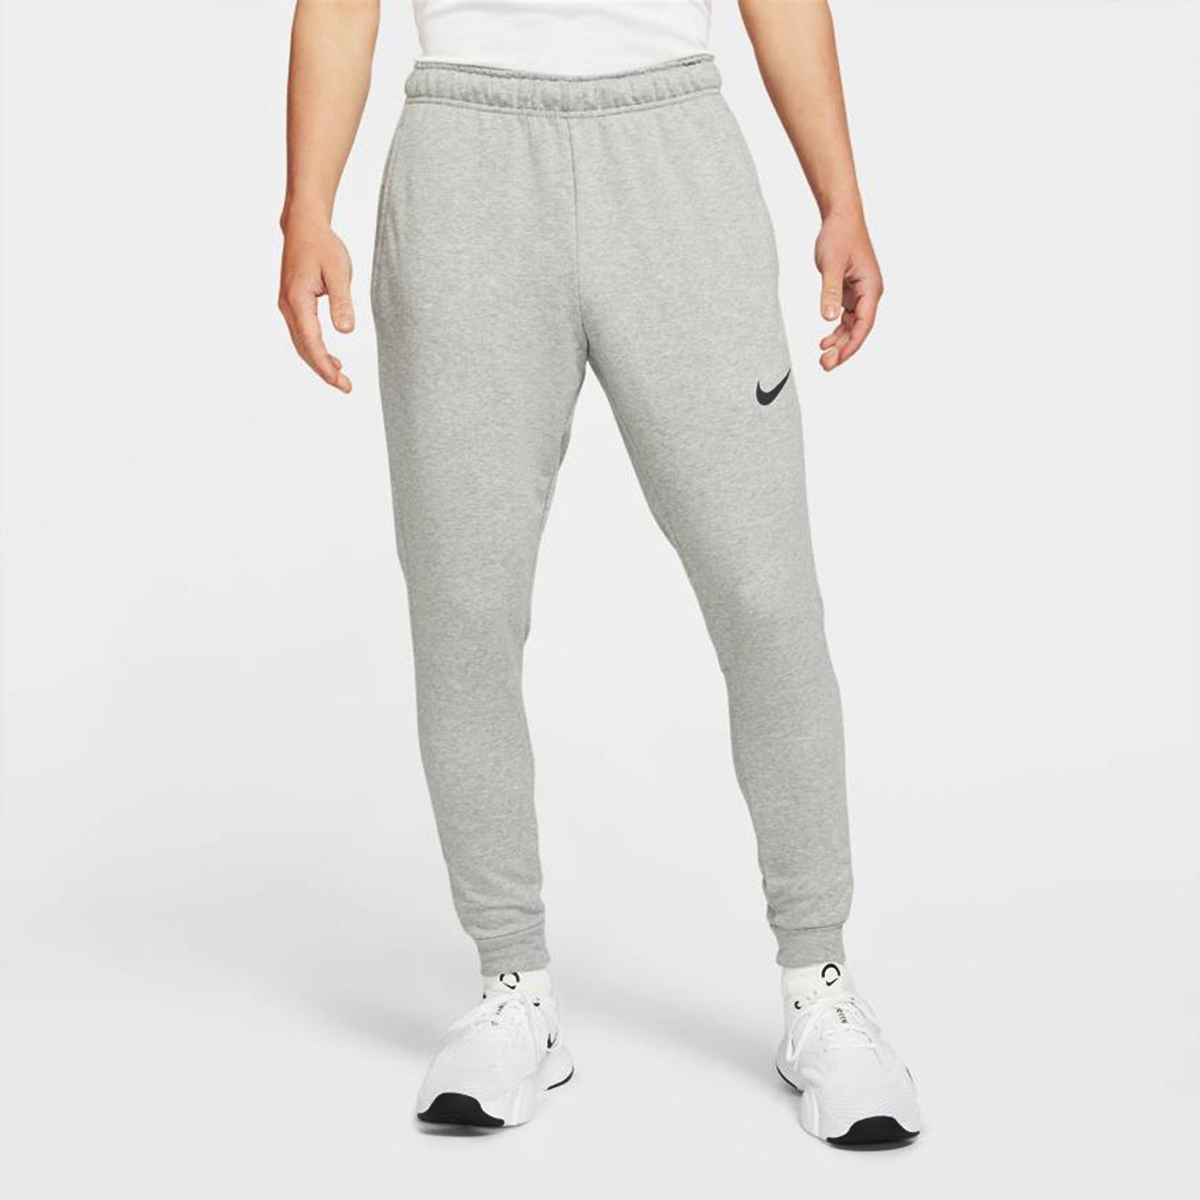 15 Superior Nike Men’s Dri-Fit Tapered Fleece Training Pants For 2023